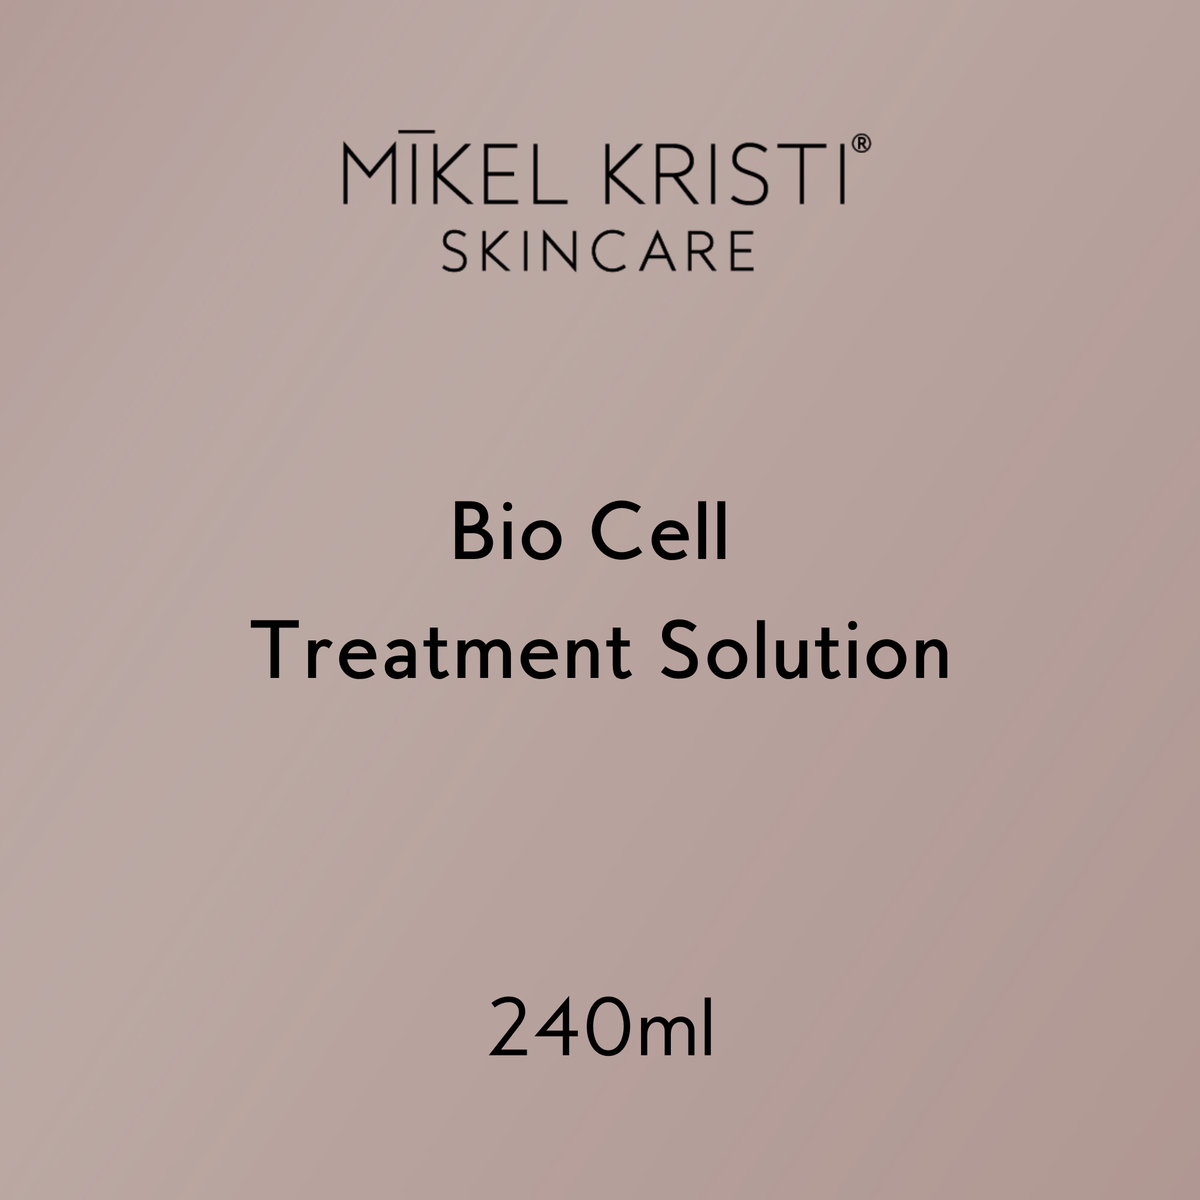 Bio Cell Treatment Solution is for professional use only. Please contact wholesaleinfo@mikelkristi.com for pricing, approval, or to learn more.